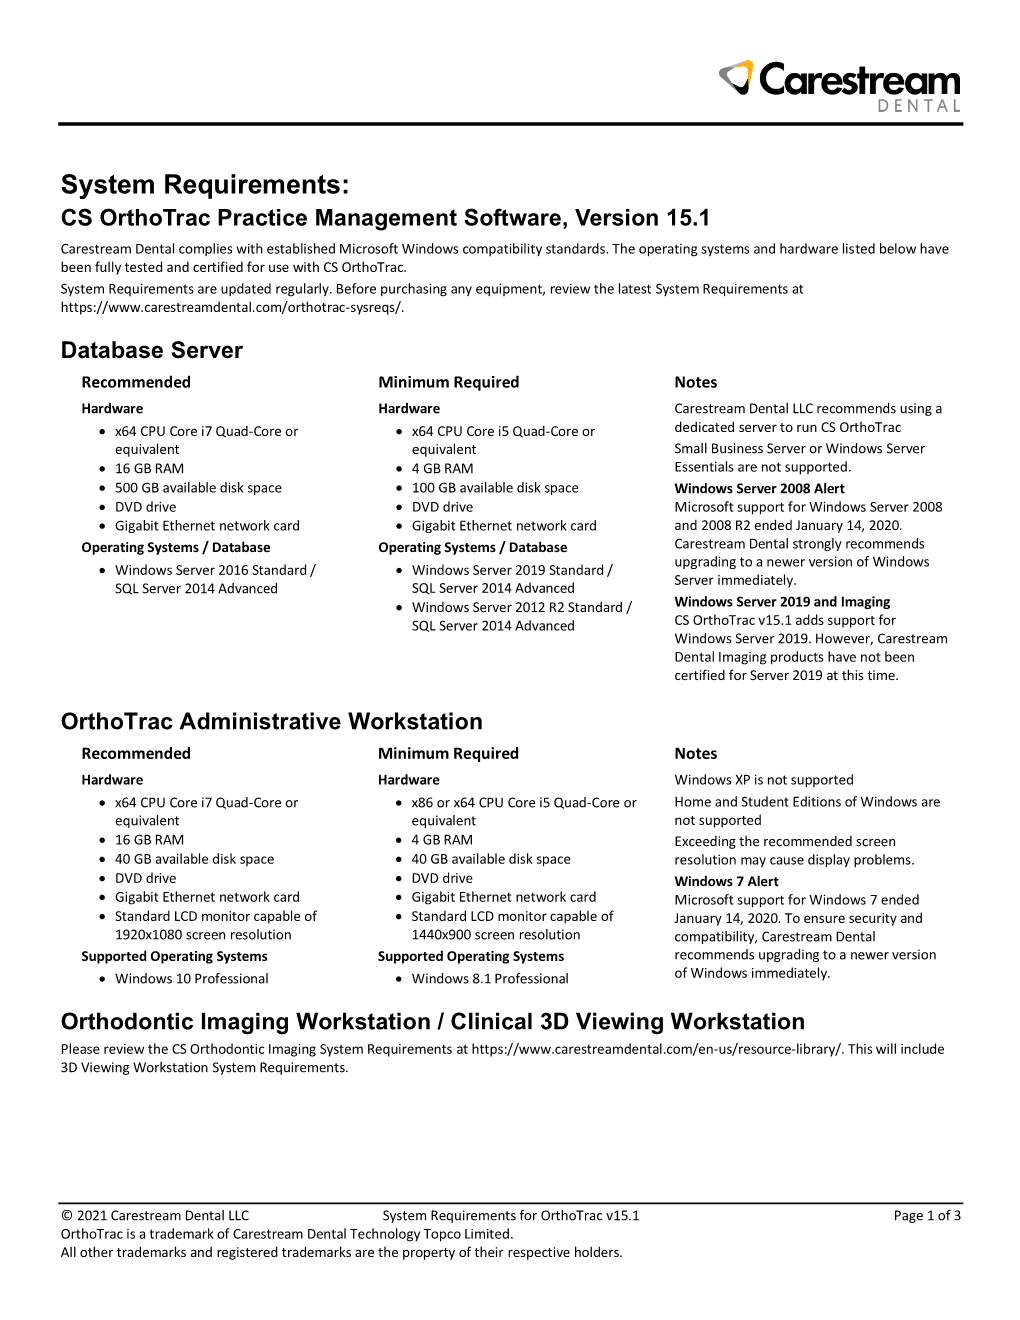 Orthotrac 15.1 System Requirements